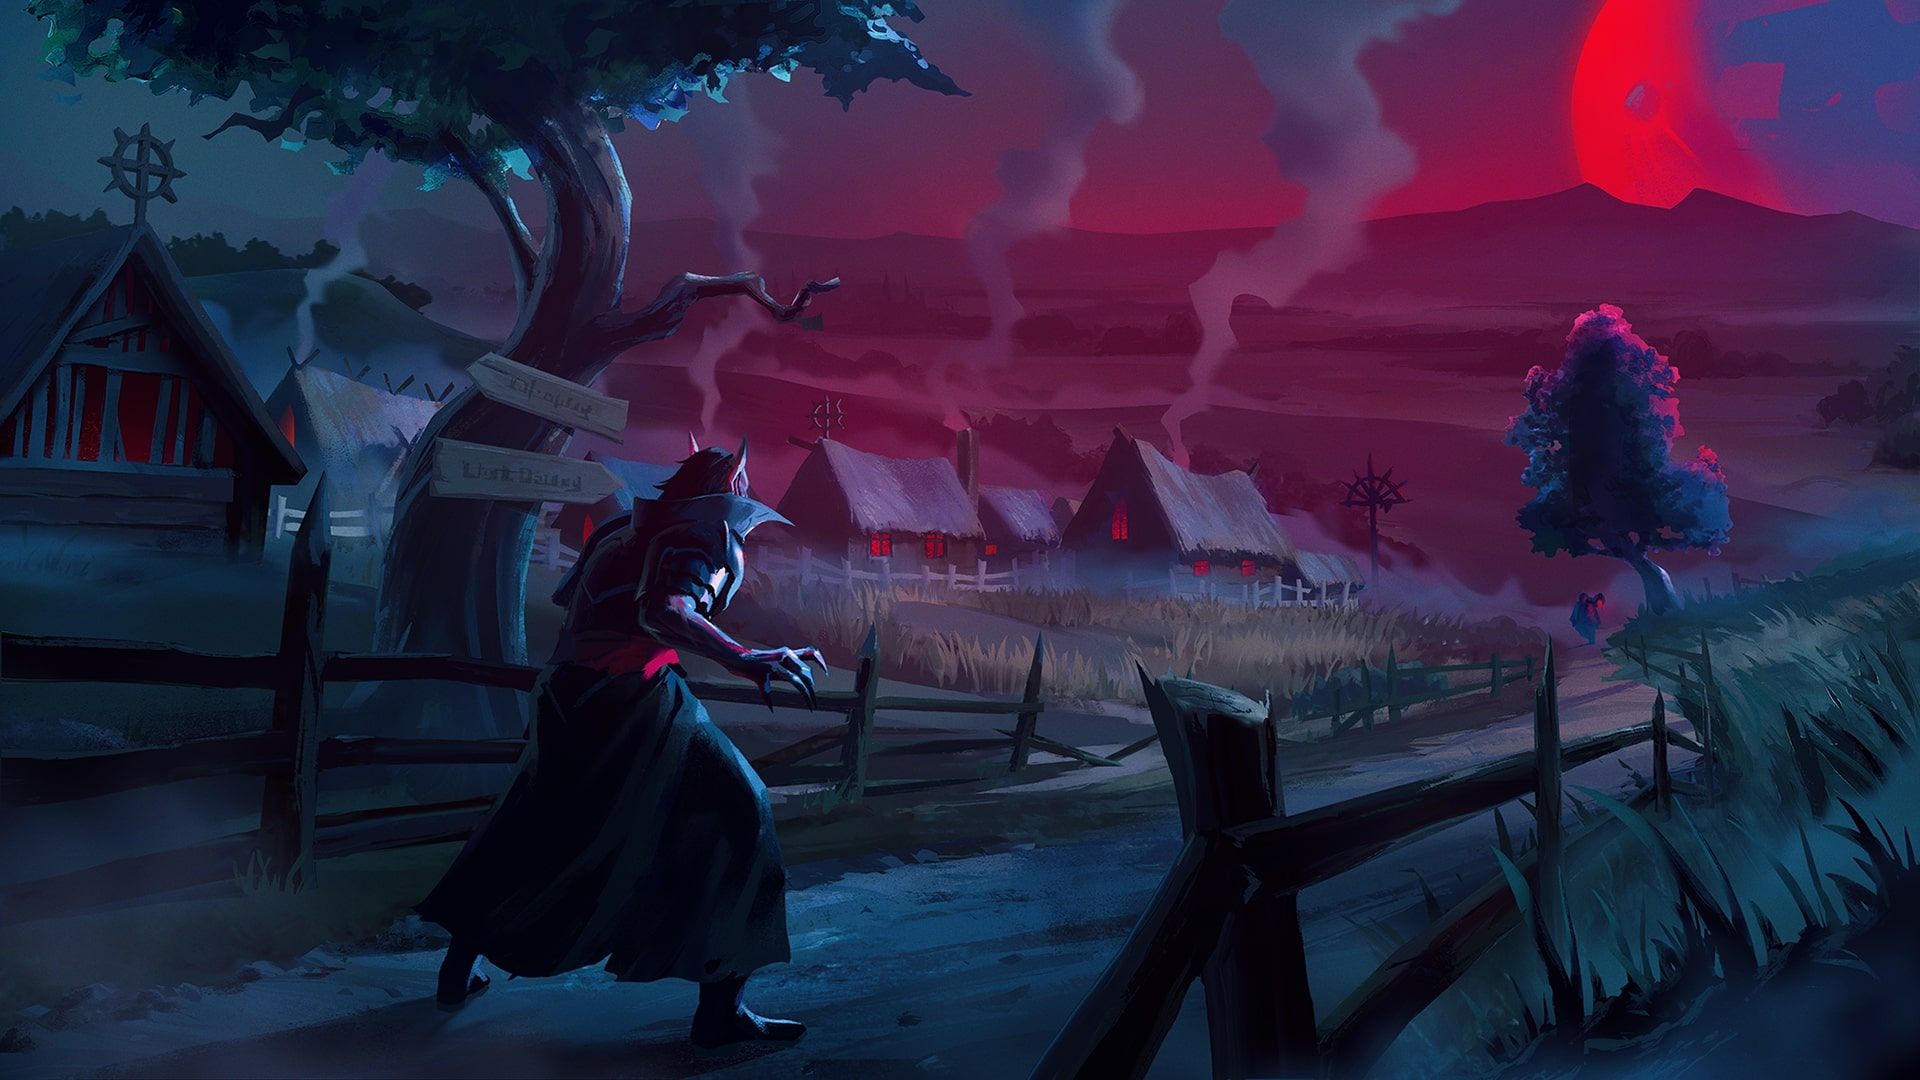 A vampire stands on a country road looking at a village under a blood moon